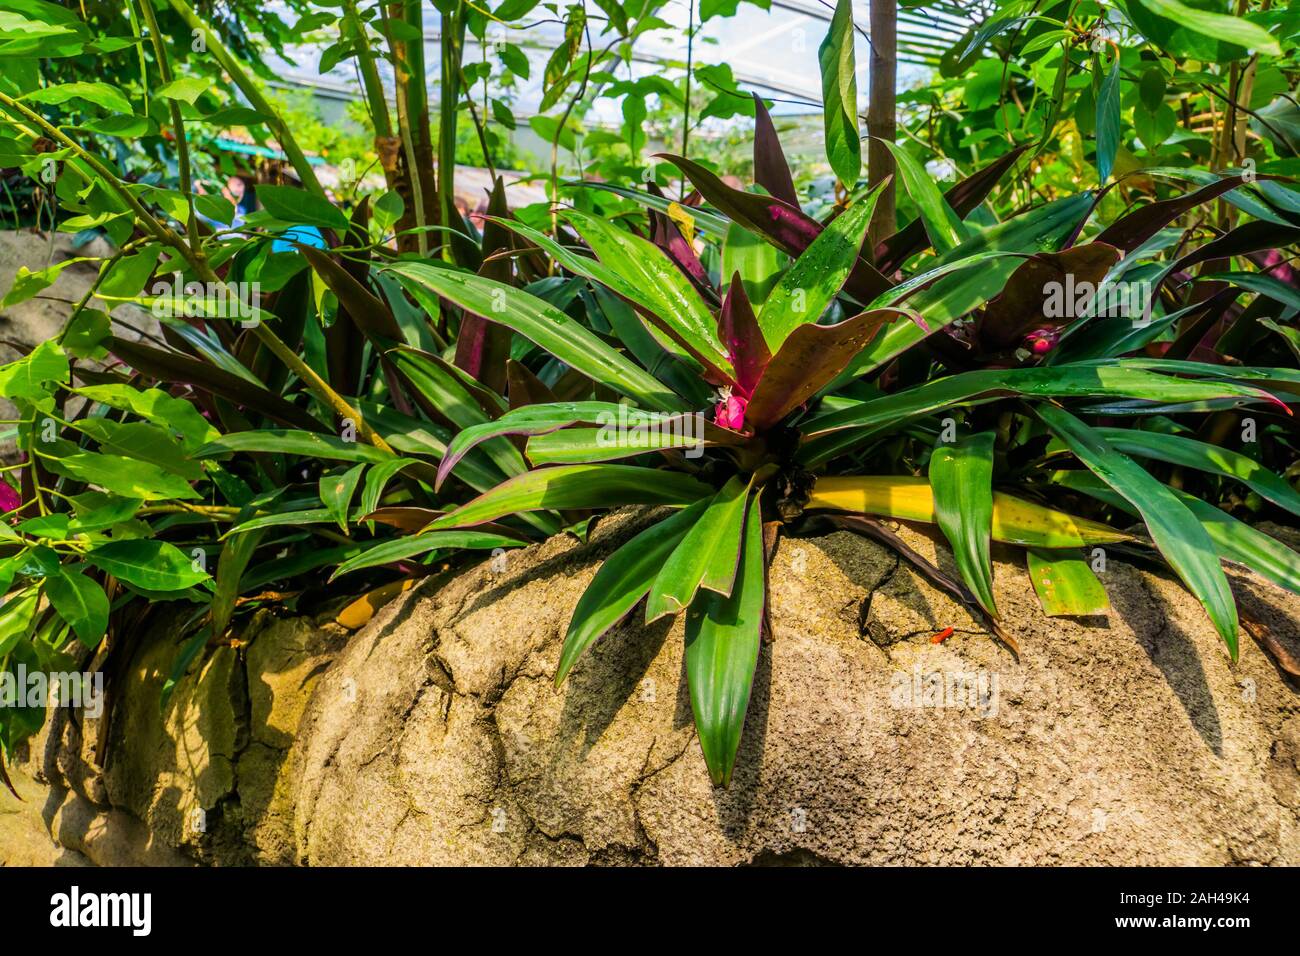 moses in the cradle, popular ornamental garden plant, exotic specie from america Stock Photo